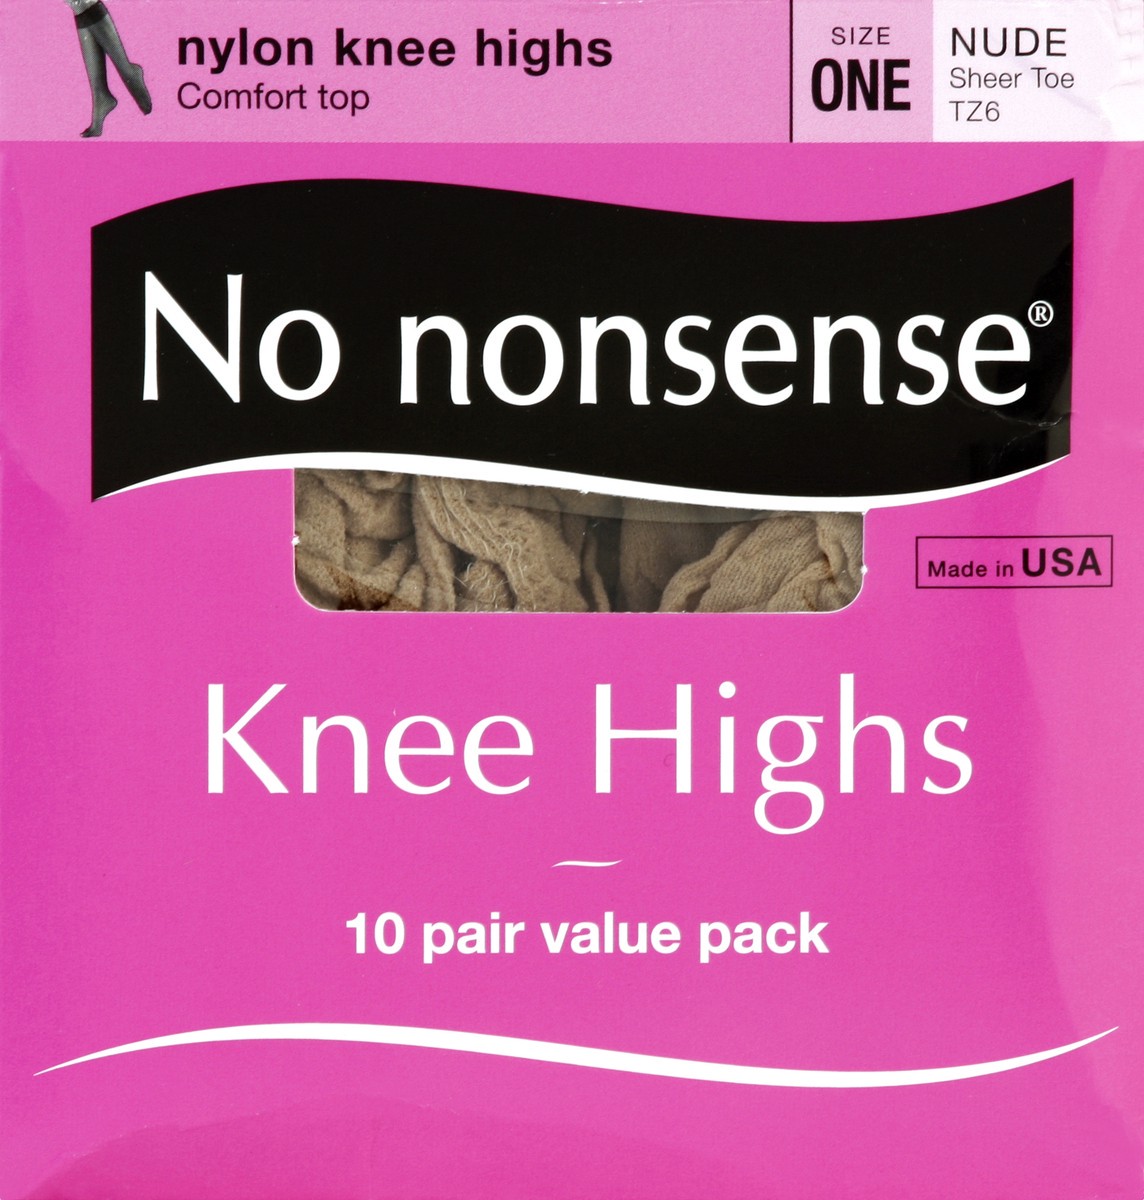 slide 4 of 4, No Nonsense Size One Nude Sheer Toe Knee Highs, 10 ct